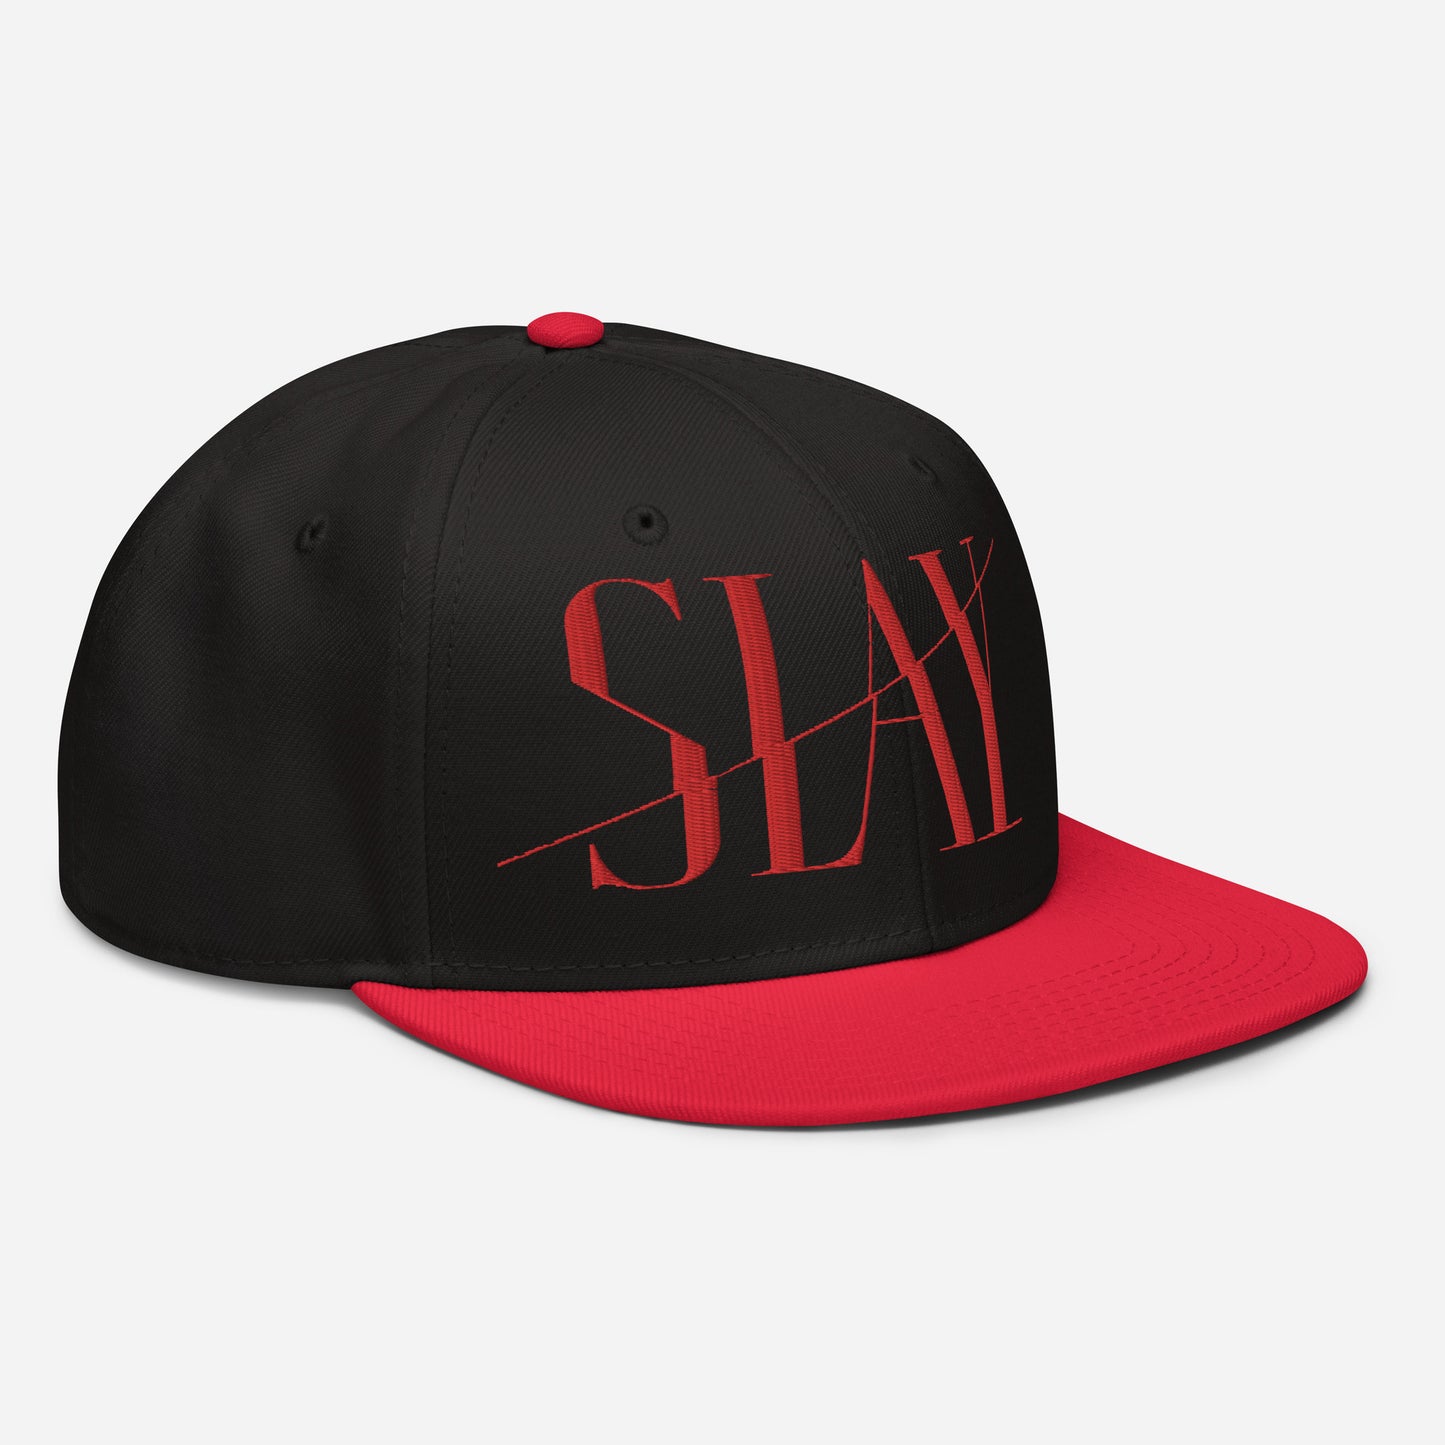 Side view of a black and red Snapback Hat with the word "SLAY" embroidered on the front.